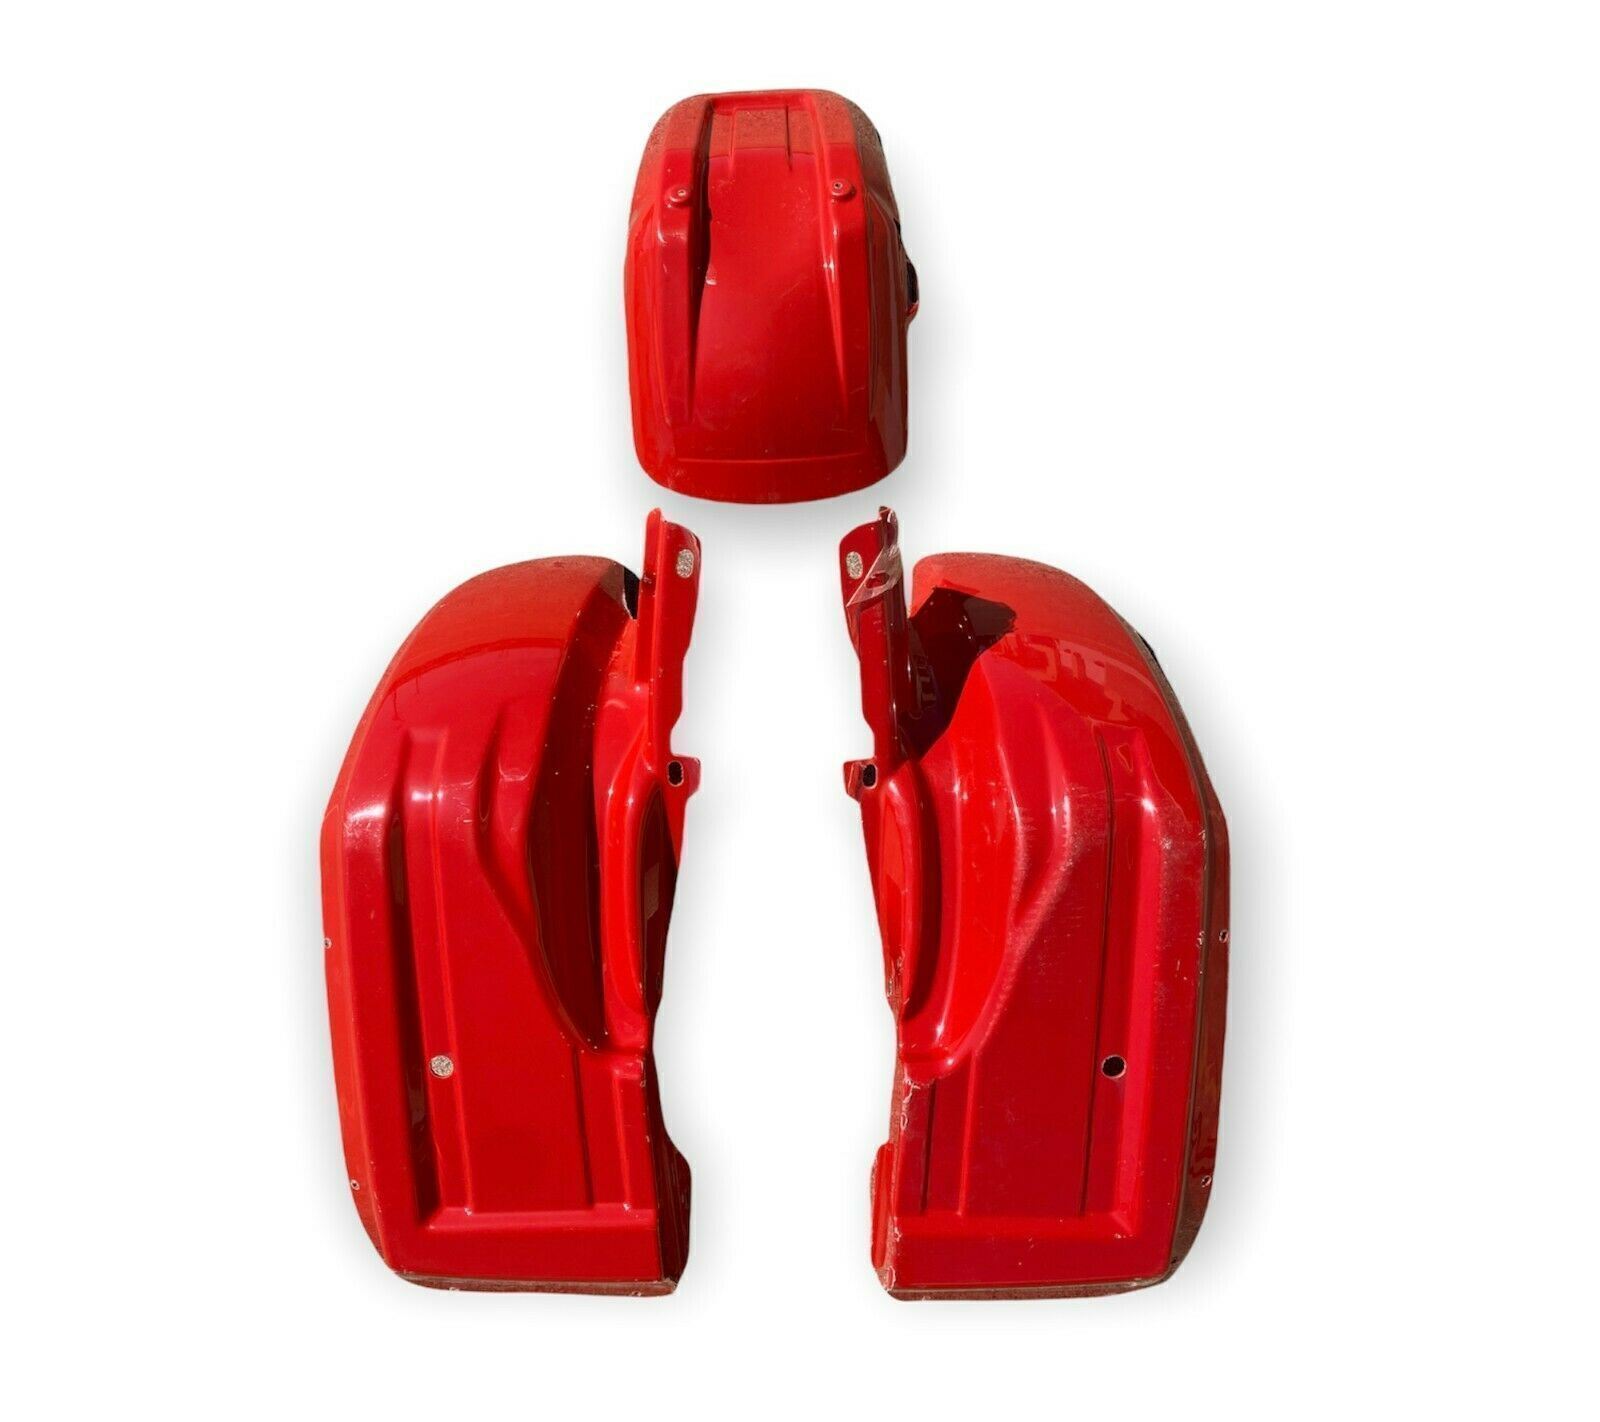 Honda ATC200es 82-84 Heavy Duty Plastic Front and Rear Fenders - RED